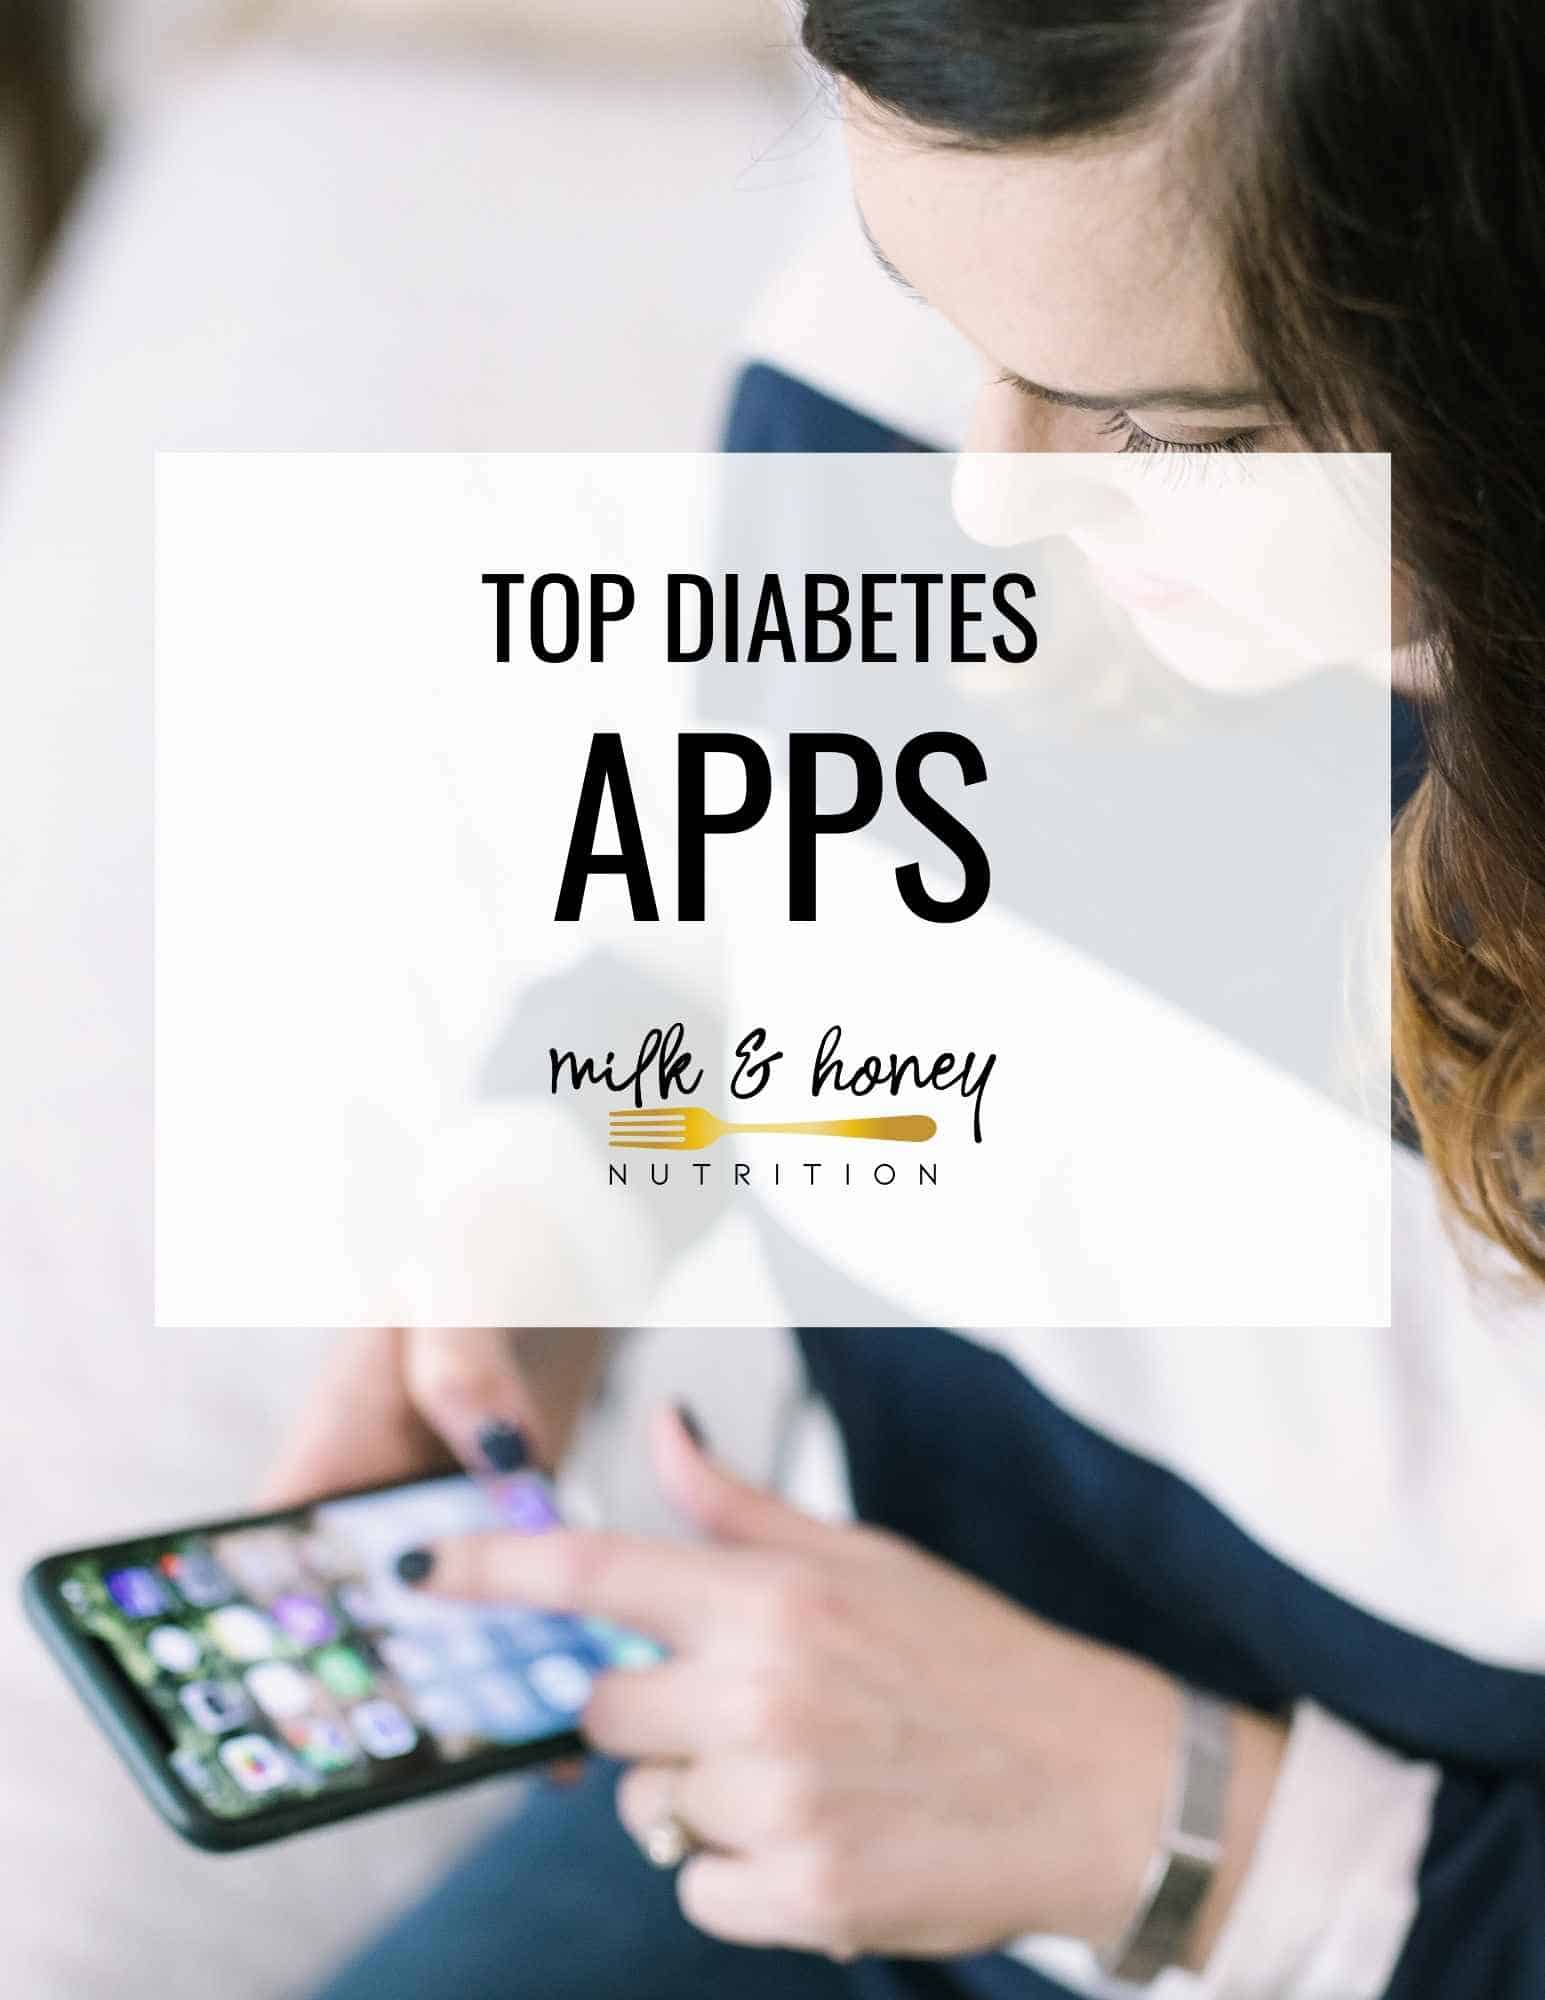 10 Top Diabetes Apps According to a Dietitian with Diabetes Milk